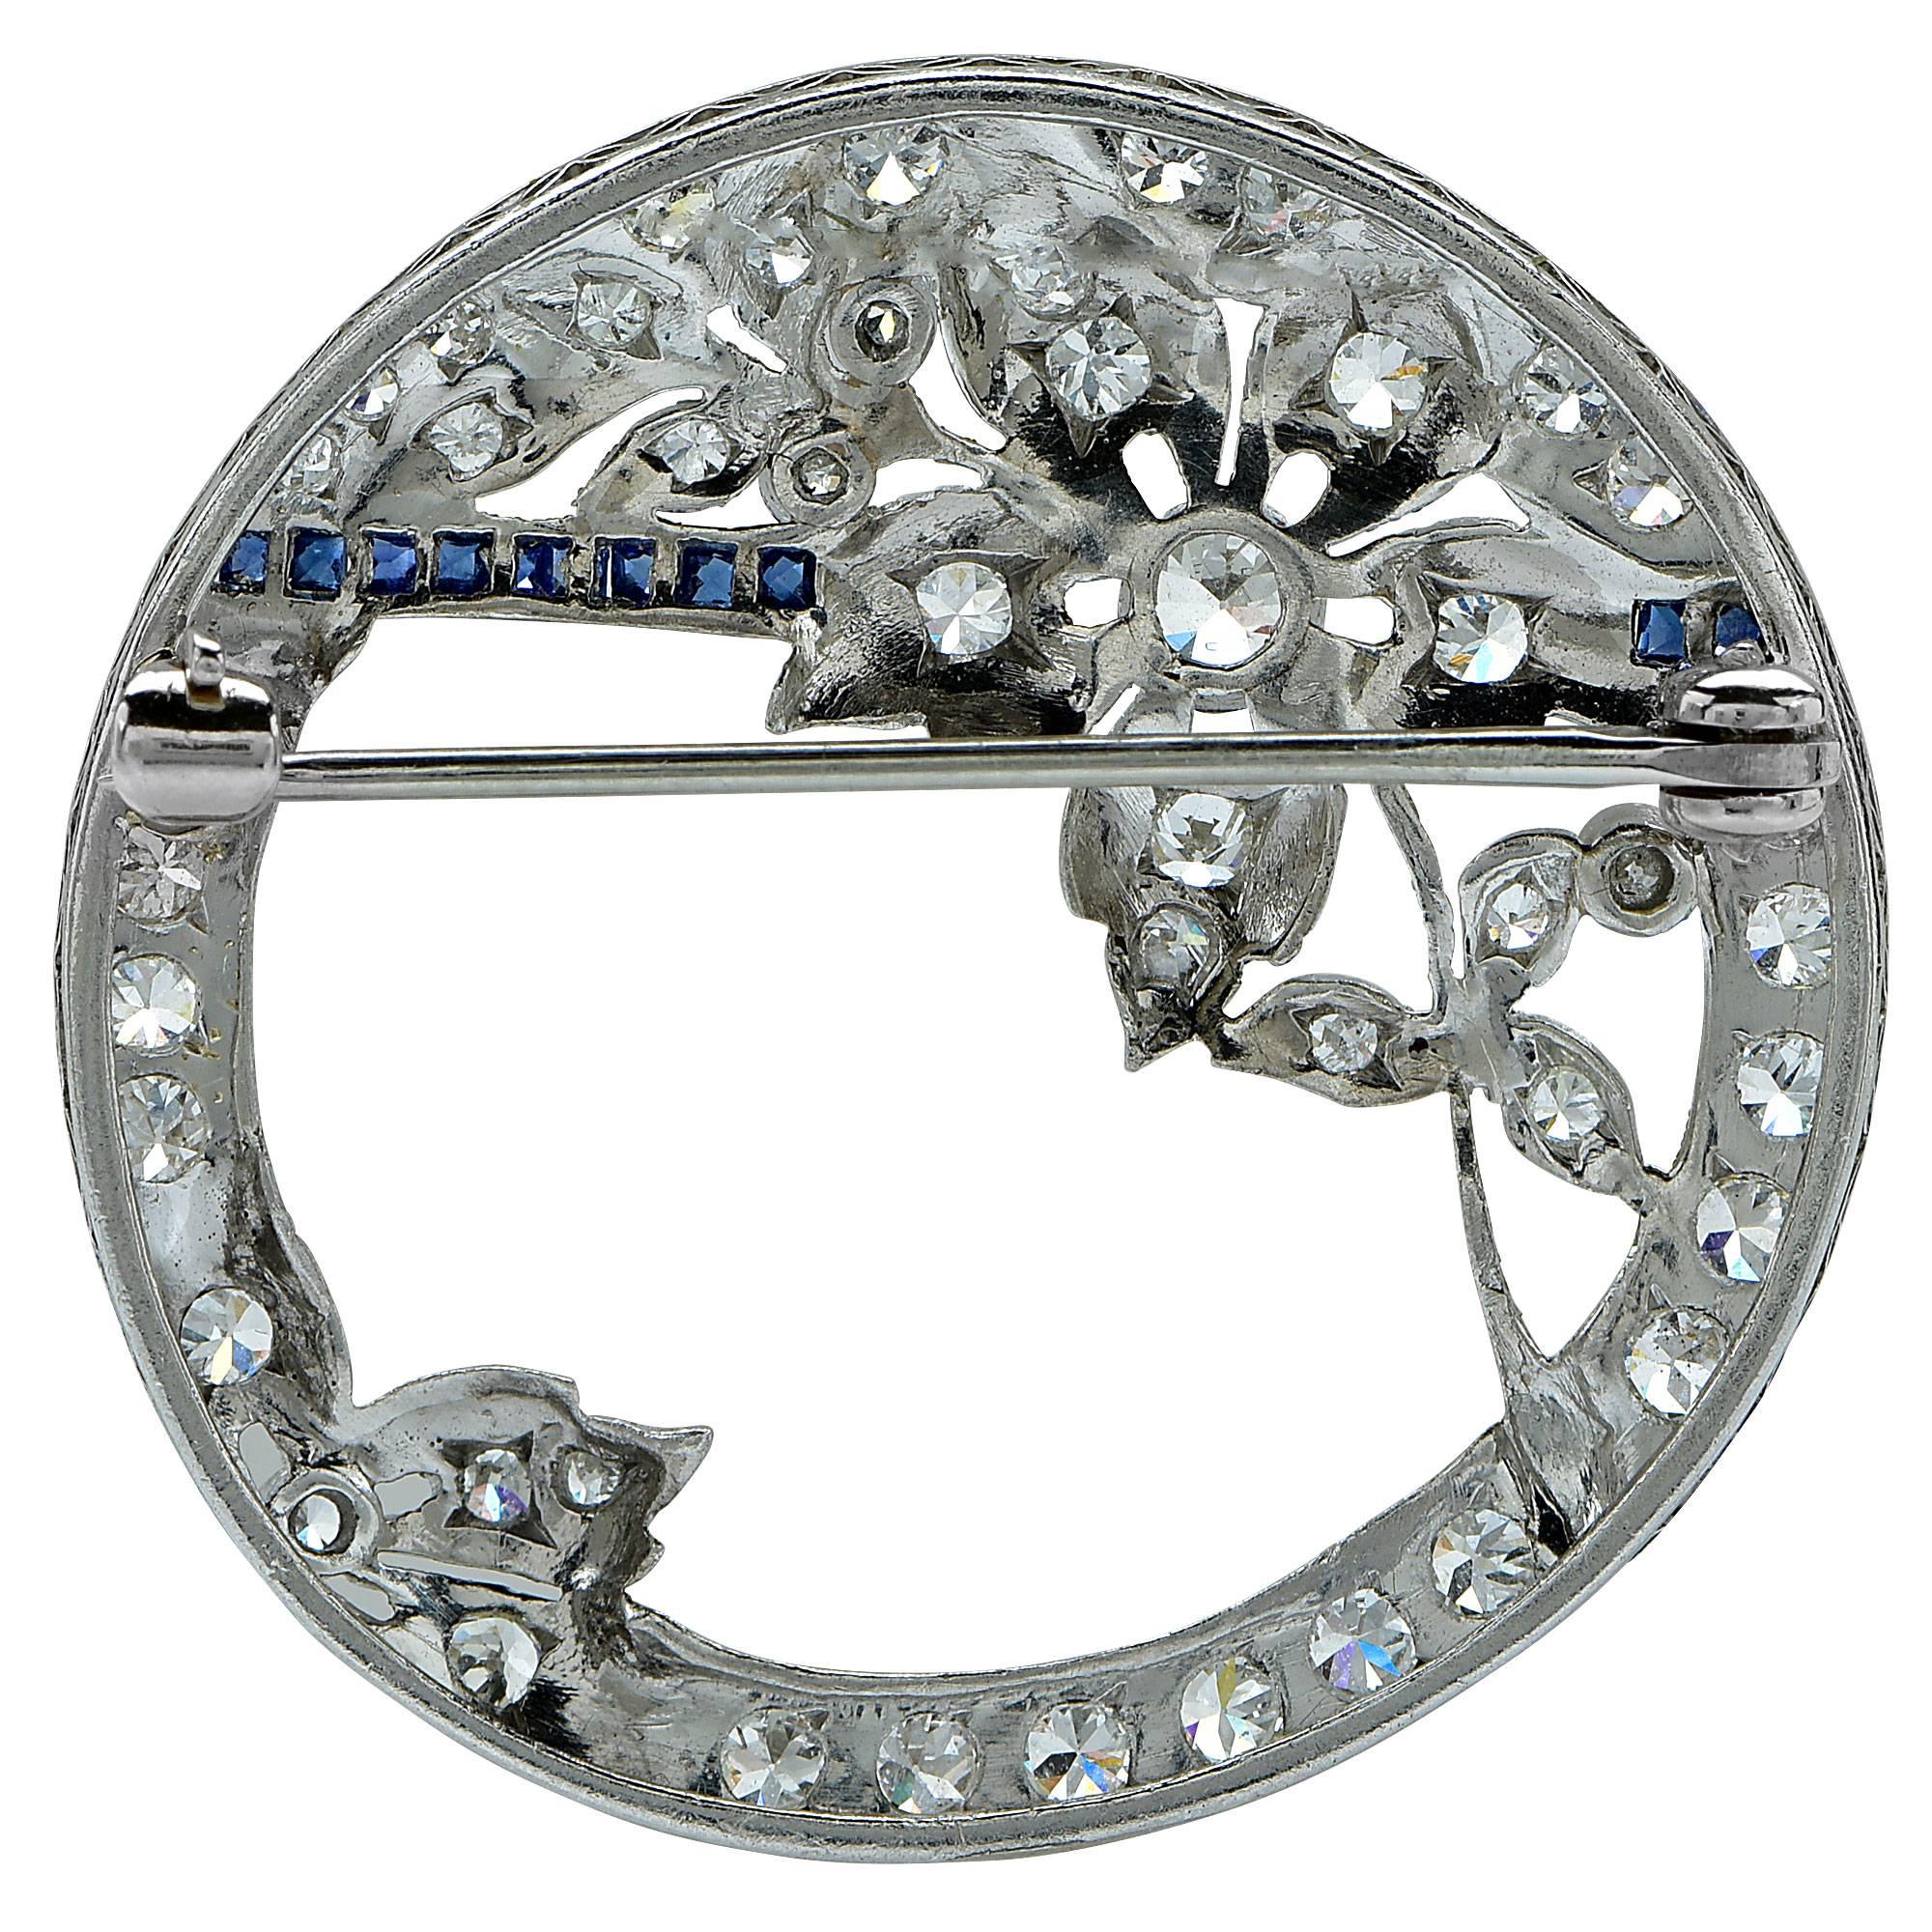 Platinum vintage brooch featuring approximately 2cts of old European cut diamonds, G color, VS clarity, accented by .11cts of blue sapphires.

Metal weight: 8.08 grams

This diamond brooch is accompanied by a retail appraisal performed by a